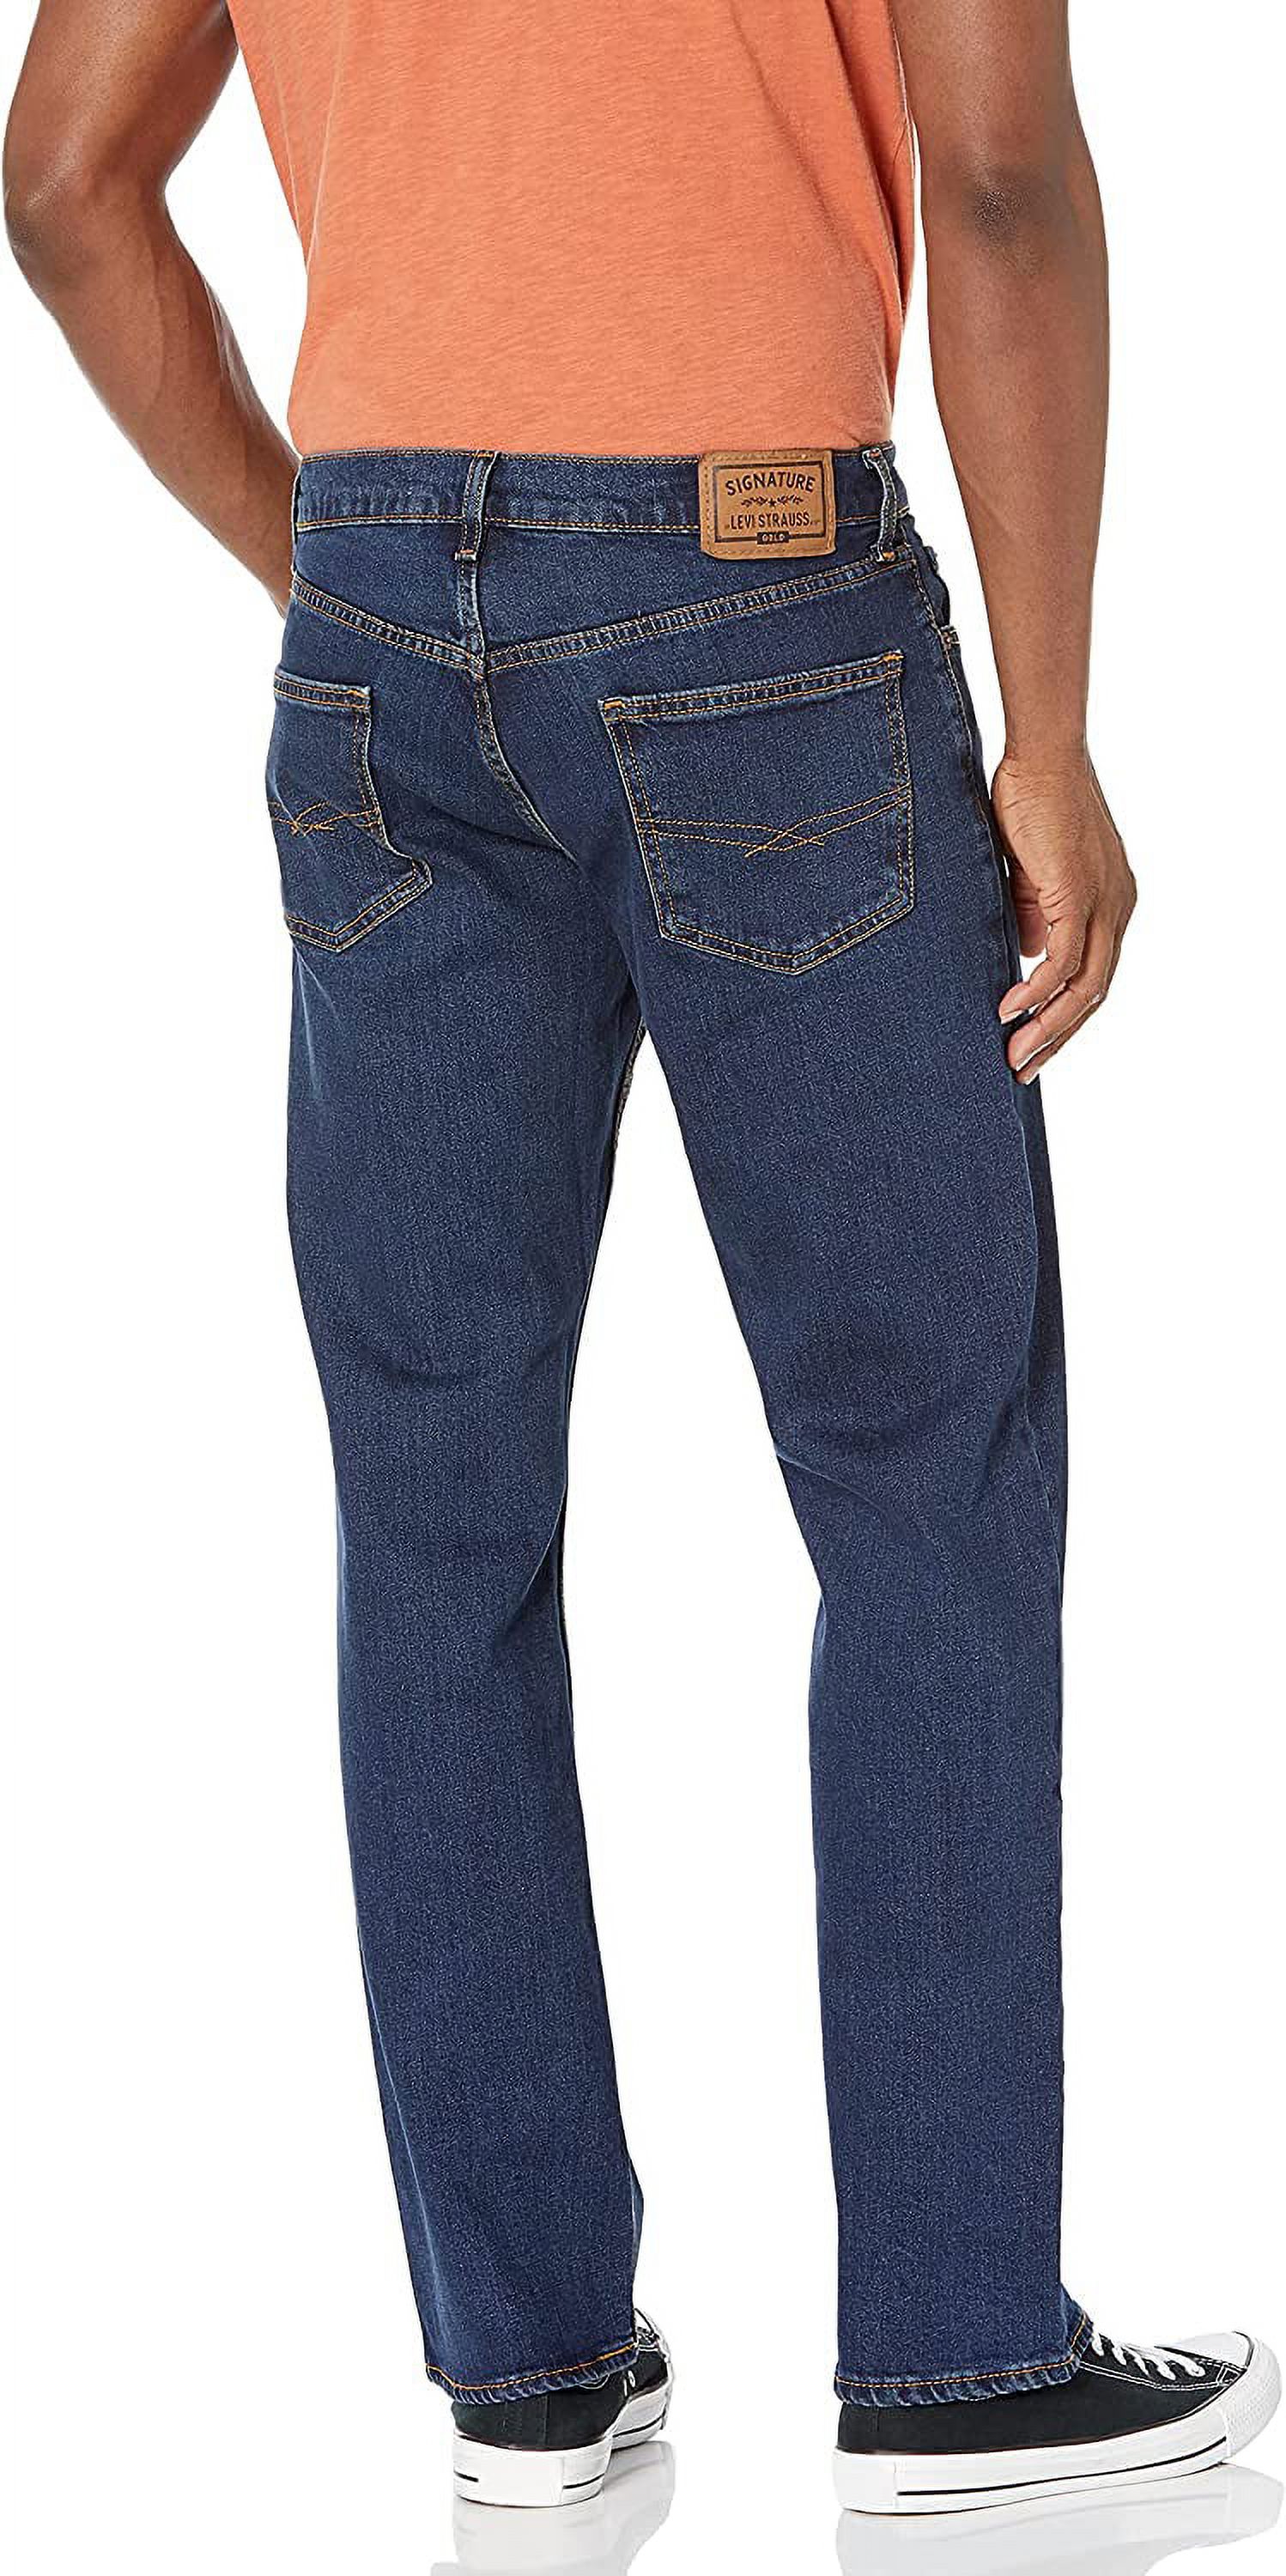 Signature by Levi Strauss & Co. Men's Relaxed Fit Jeans - image 2 of 3